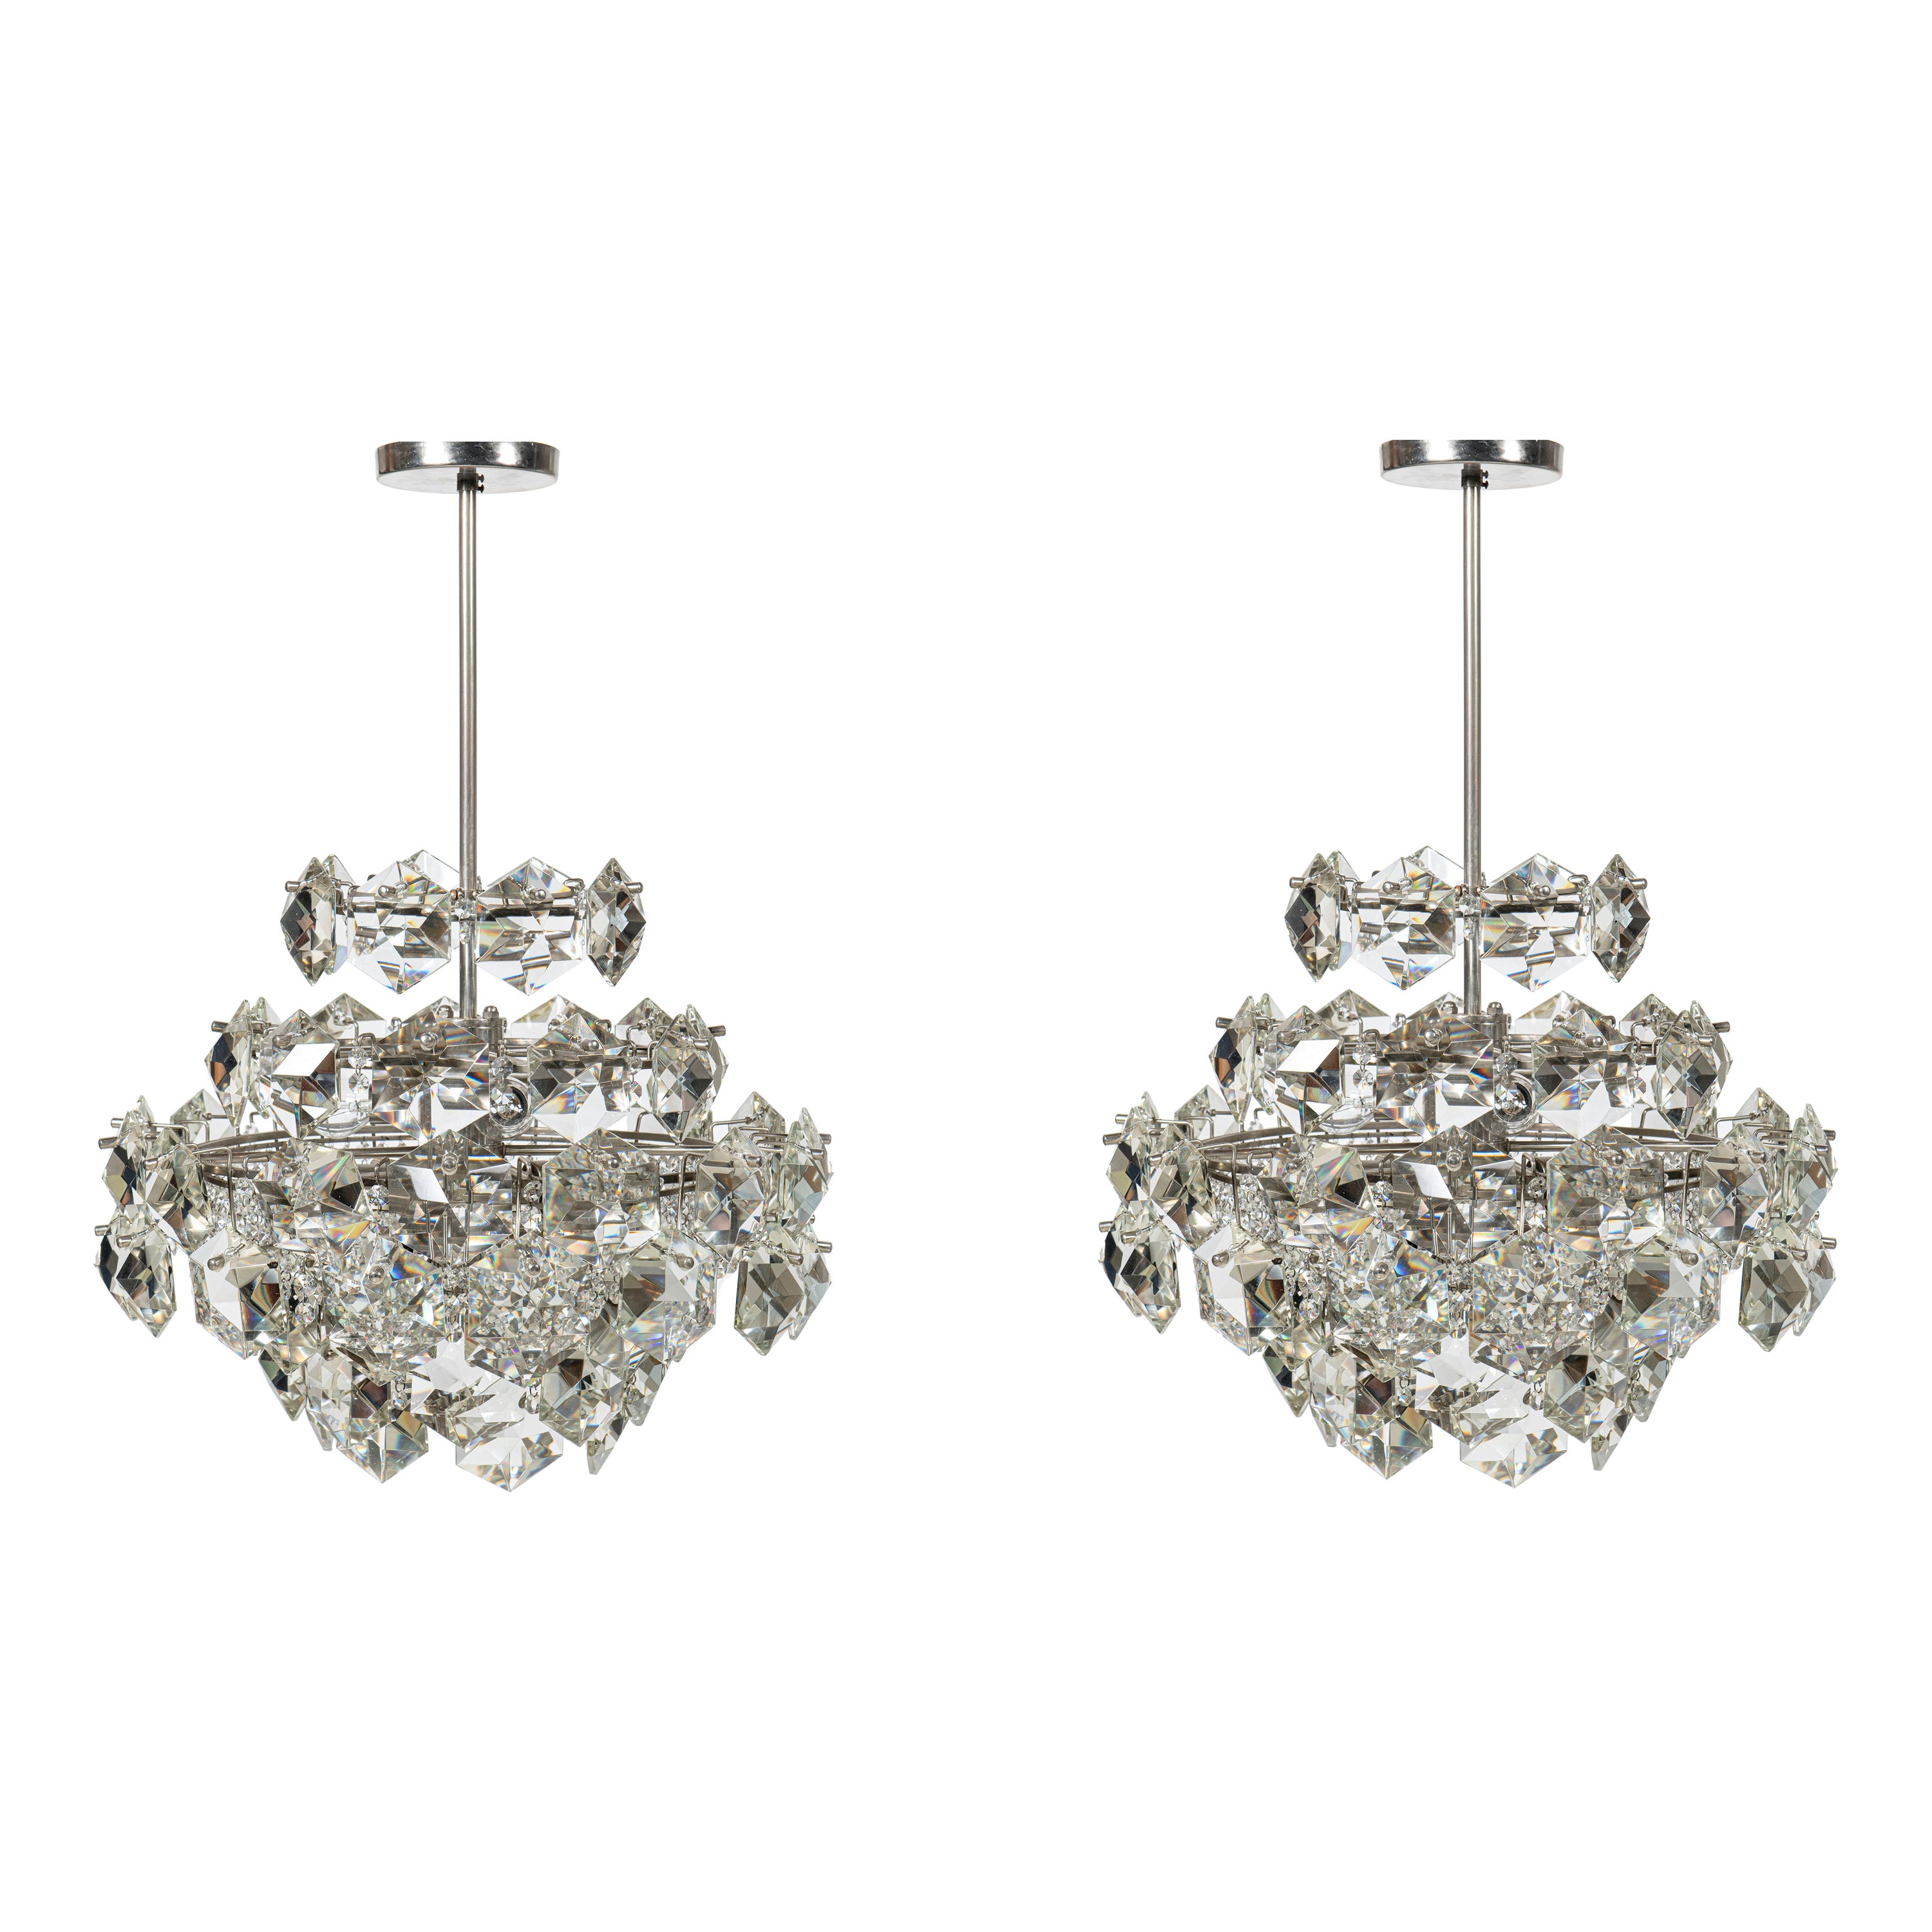 Pair of Chrome Metal and Crystal Glass Chandeliers by Bakalowits & Söhne, 1960 For Sale